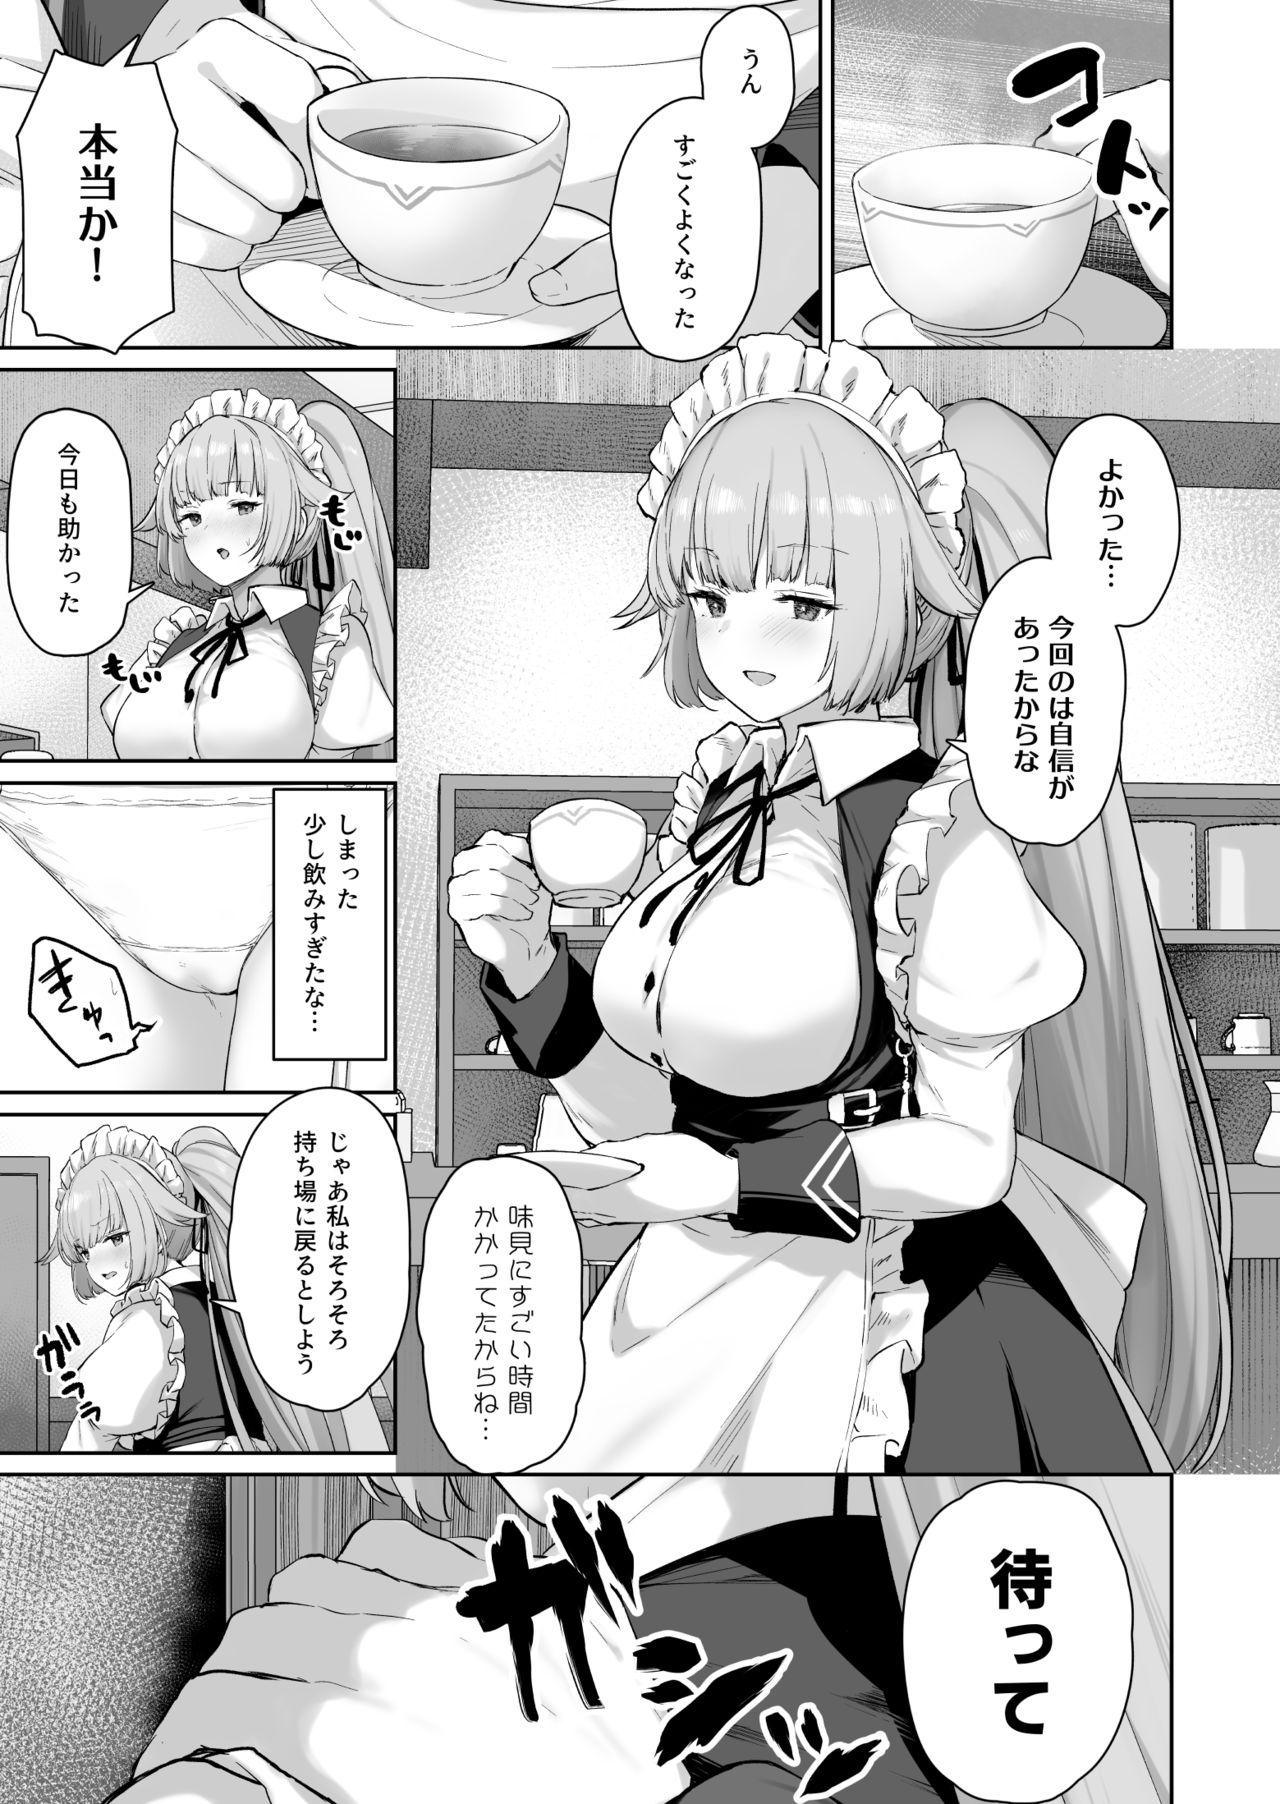 Whores NTW-20 - Girls frontline Dominicana - Page 1